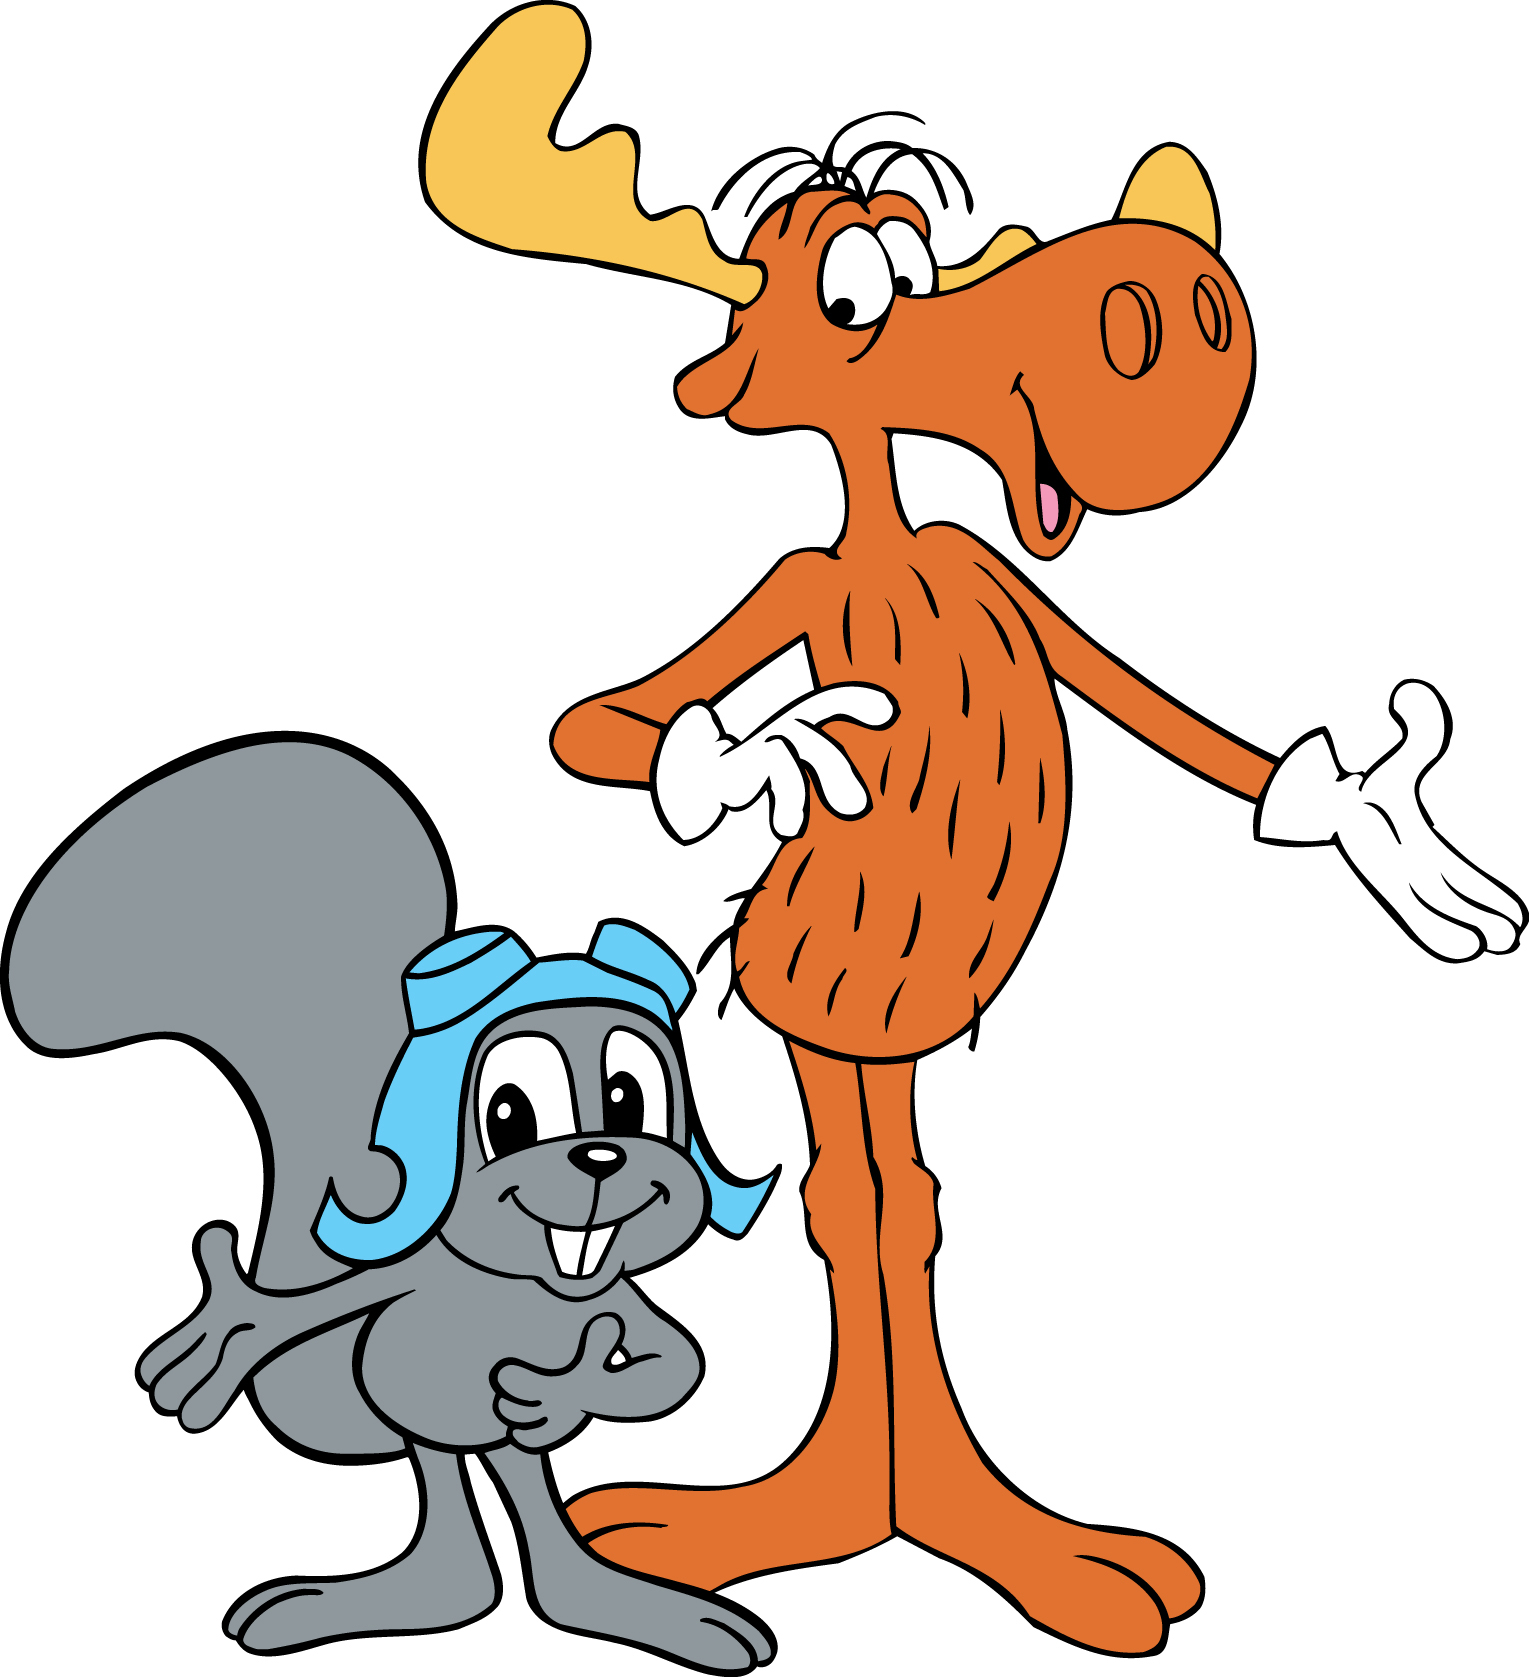 Rocky_and_Bullwinkle.